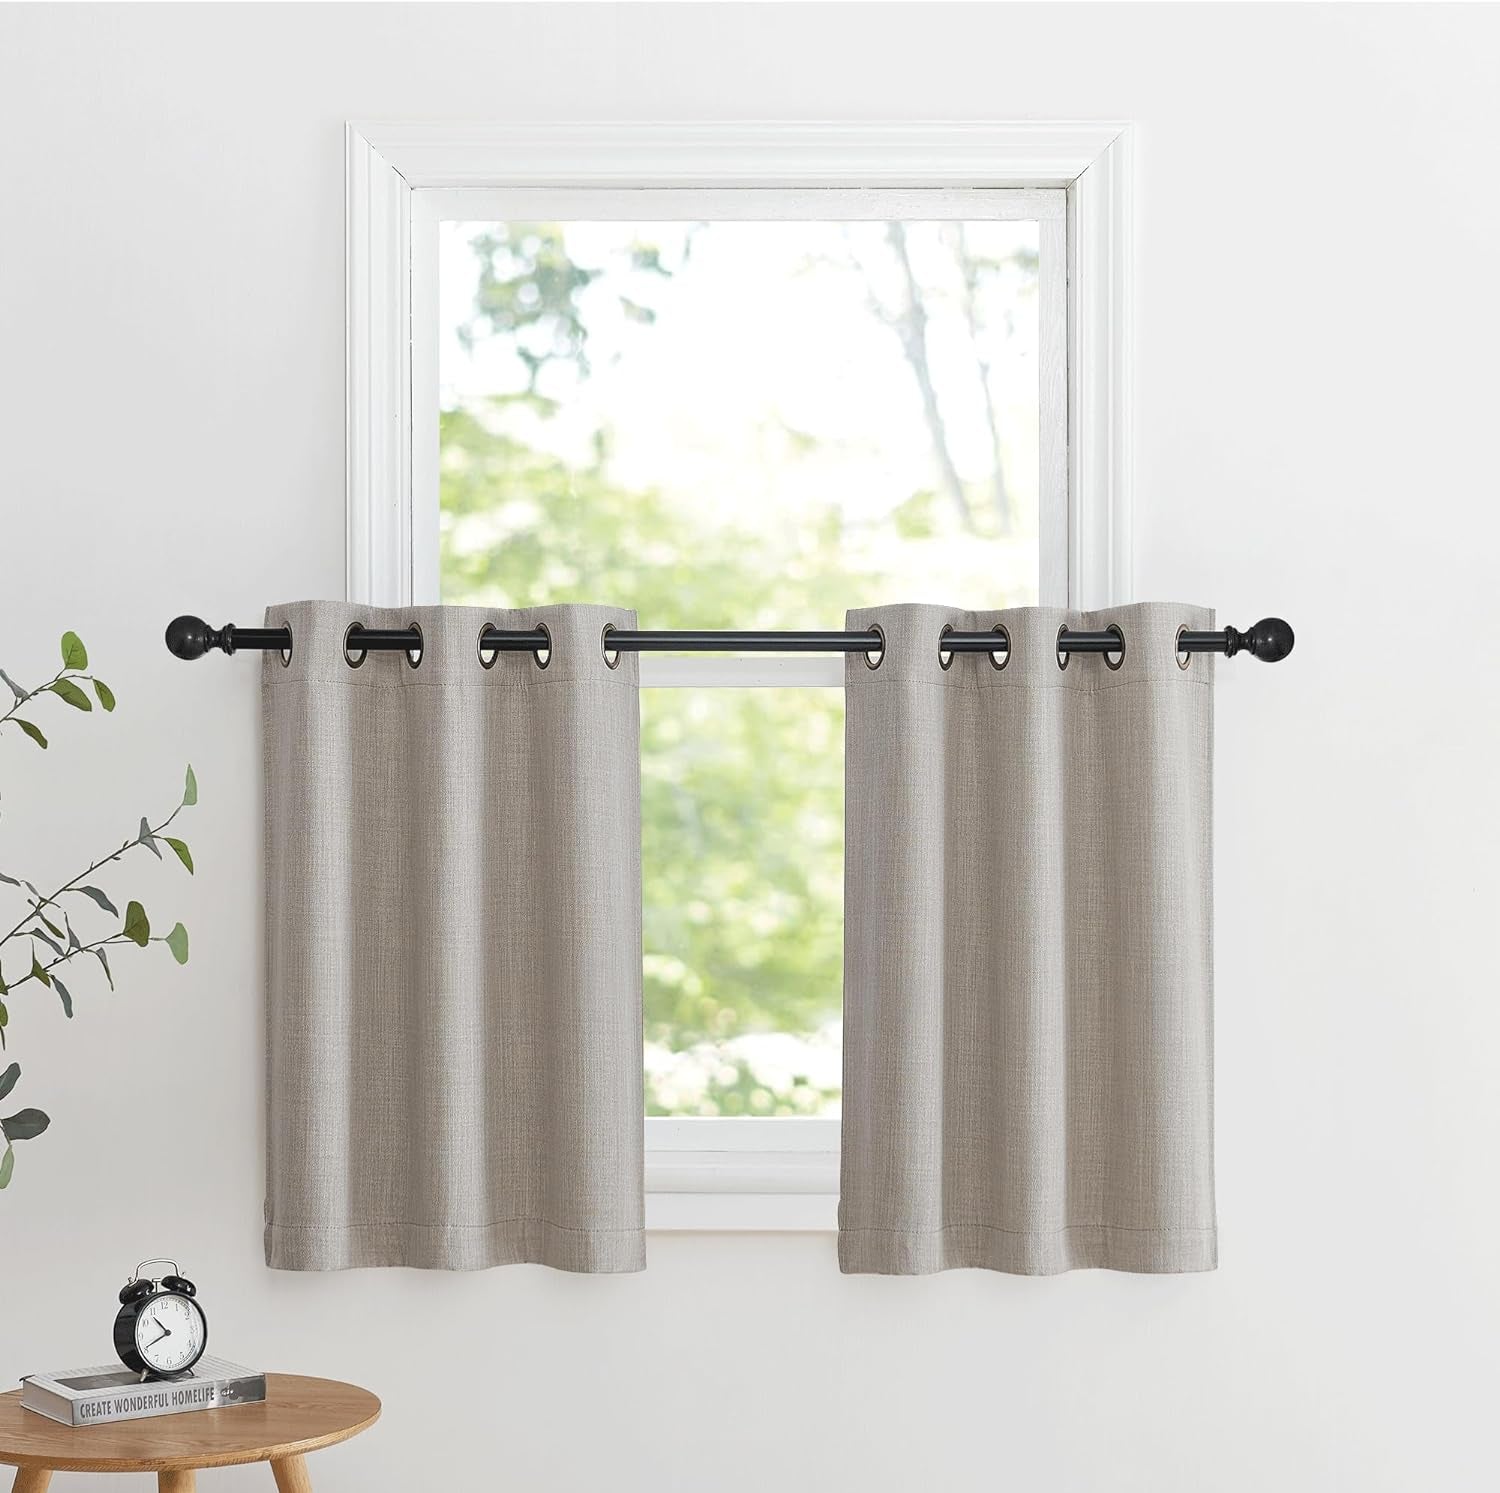 NICETOWN Linen Curtain Valances for Living Room 30 Inch Length 2 Panels, Grommet Top Light Blocking Room Darkening Curtains Thermal Insulated Window Tiers for Barhtoom Window, Angora, W50 X L30